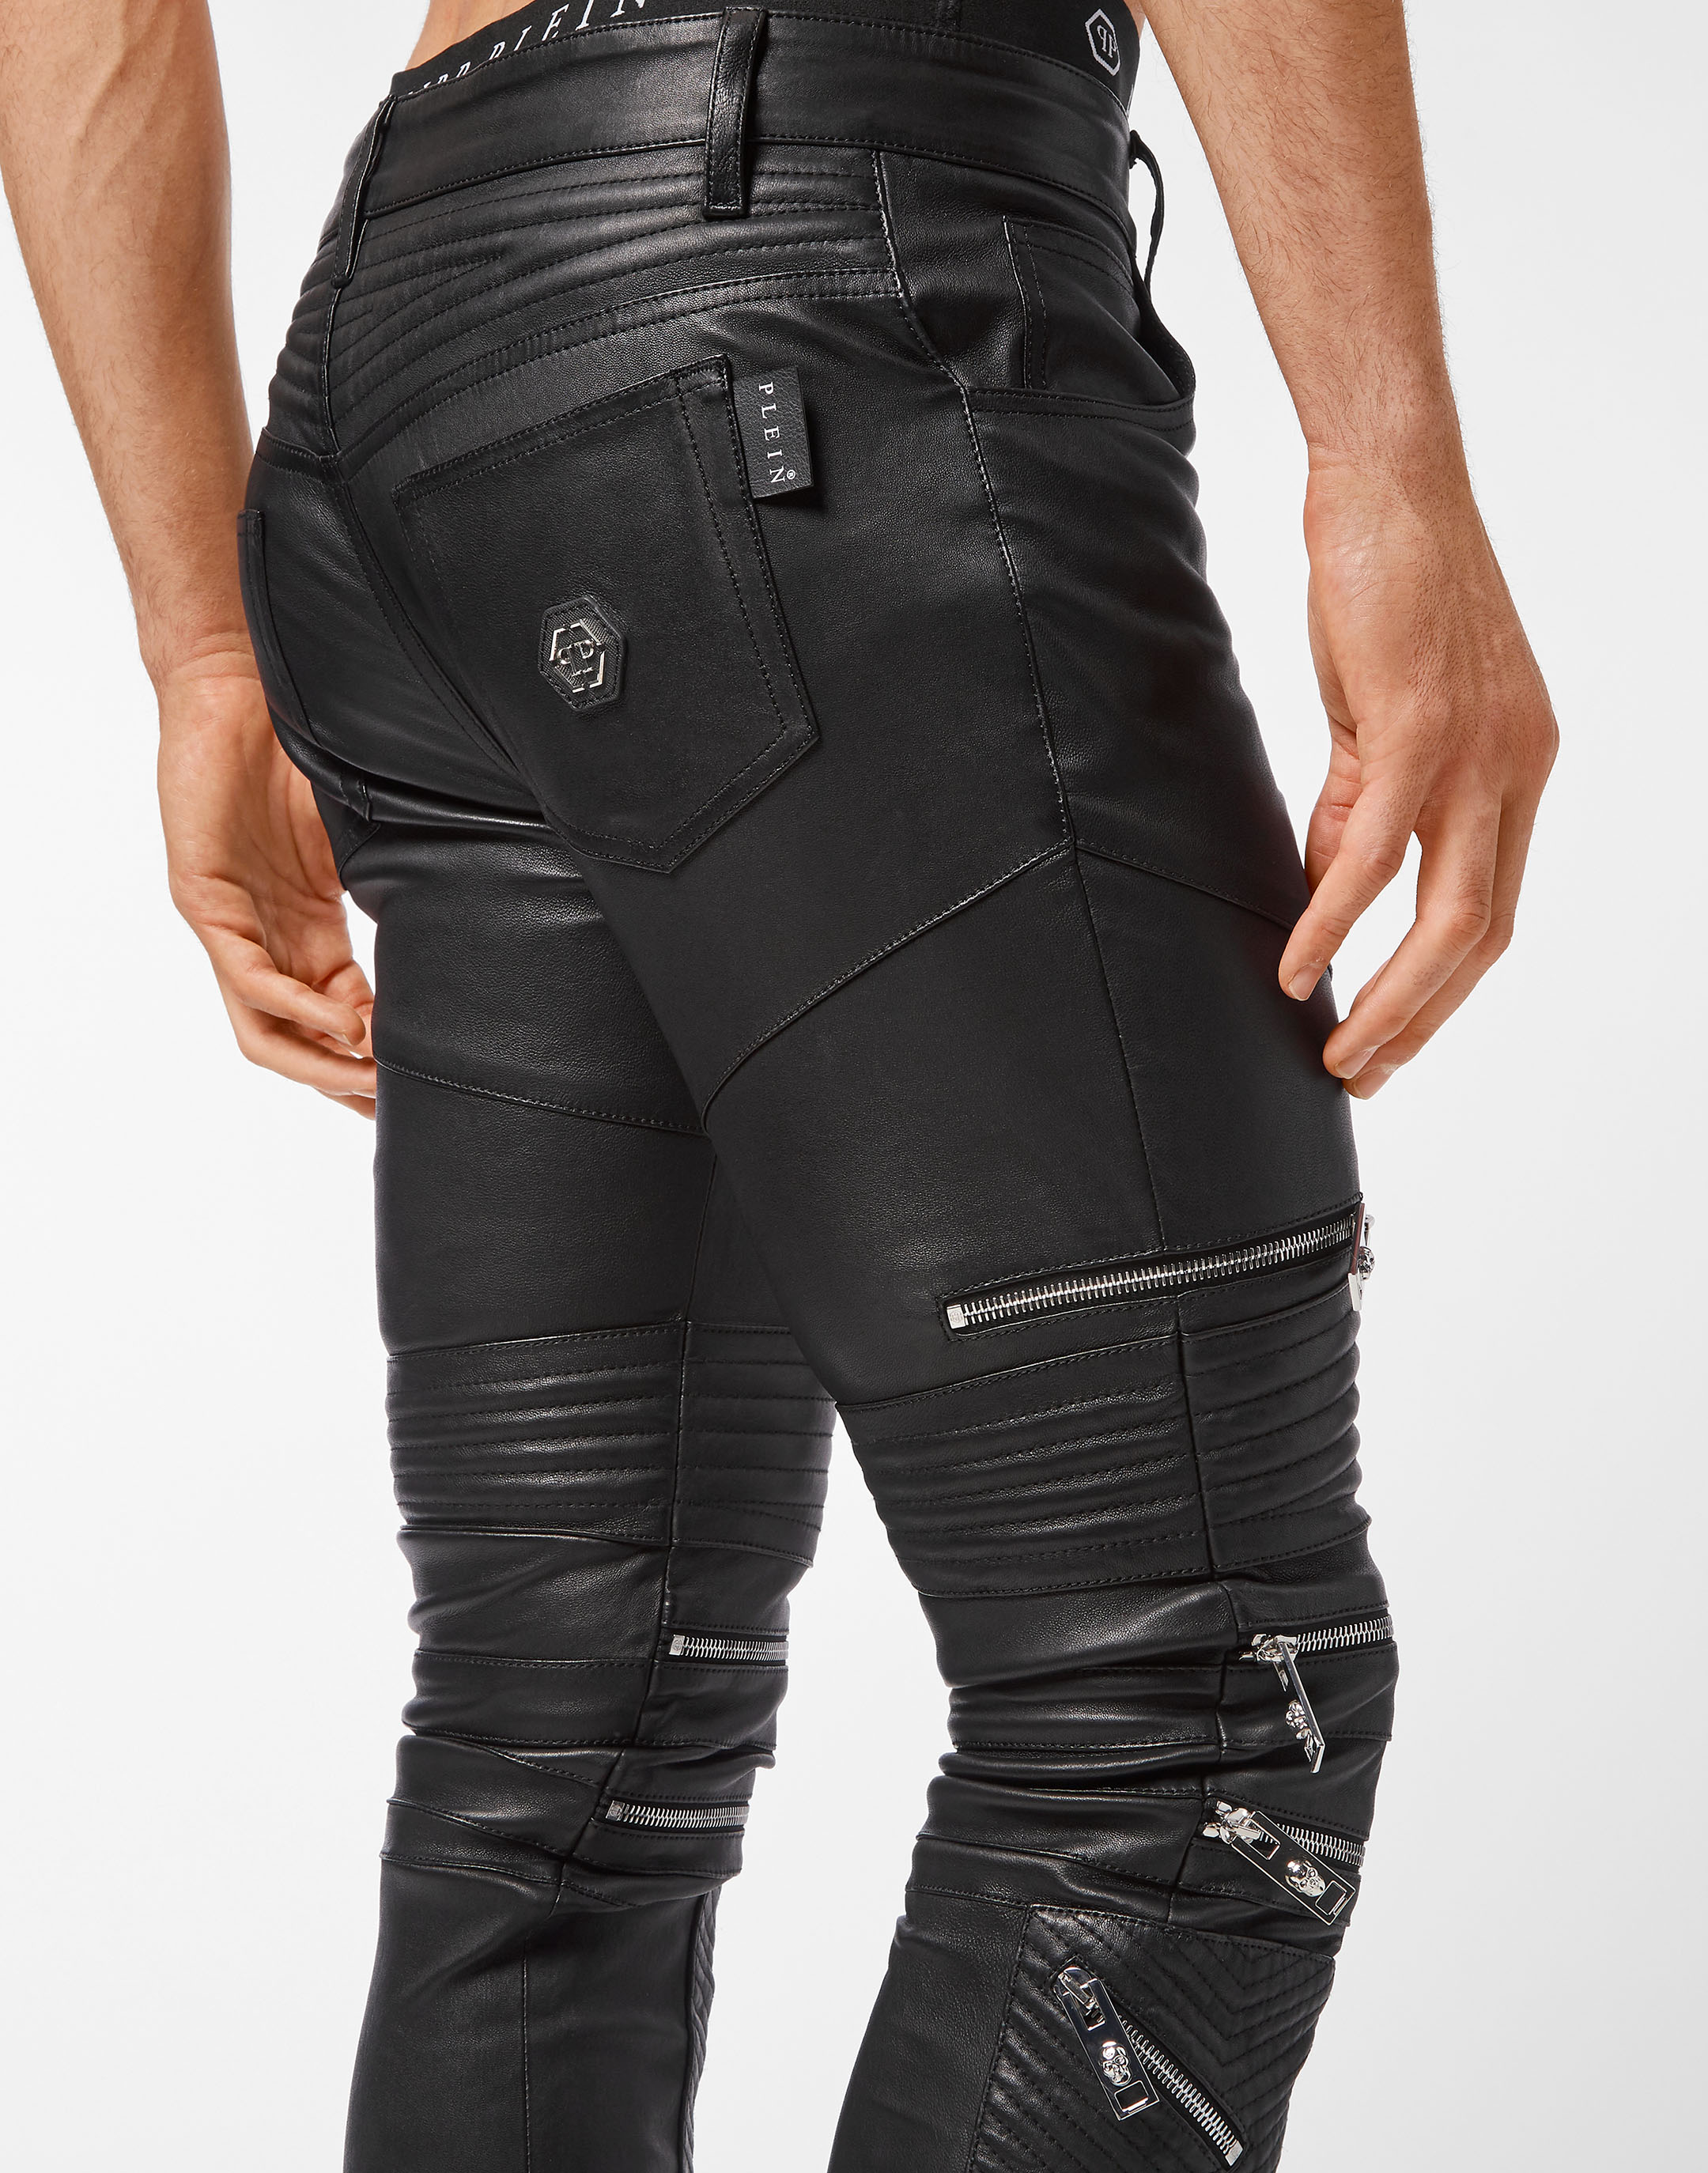 Details 90+ leather motorcycle trousers super hot - in.cdgdbentre